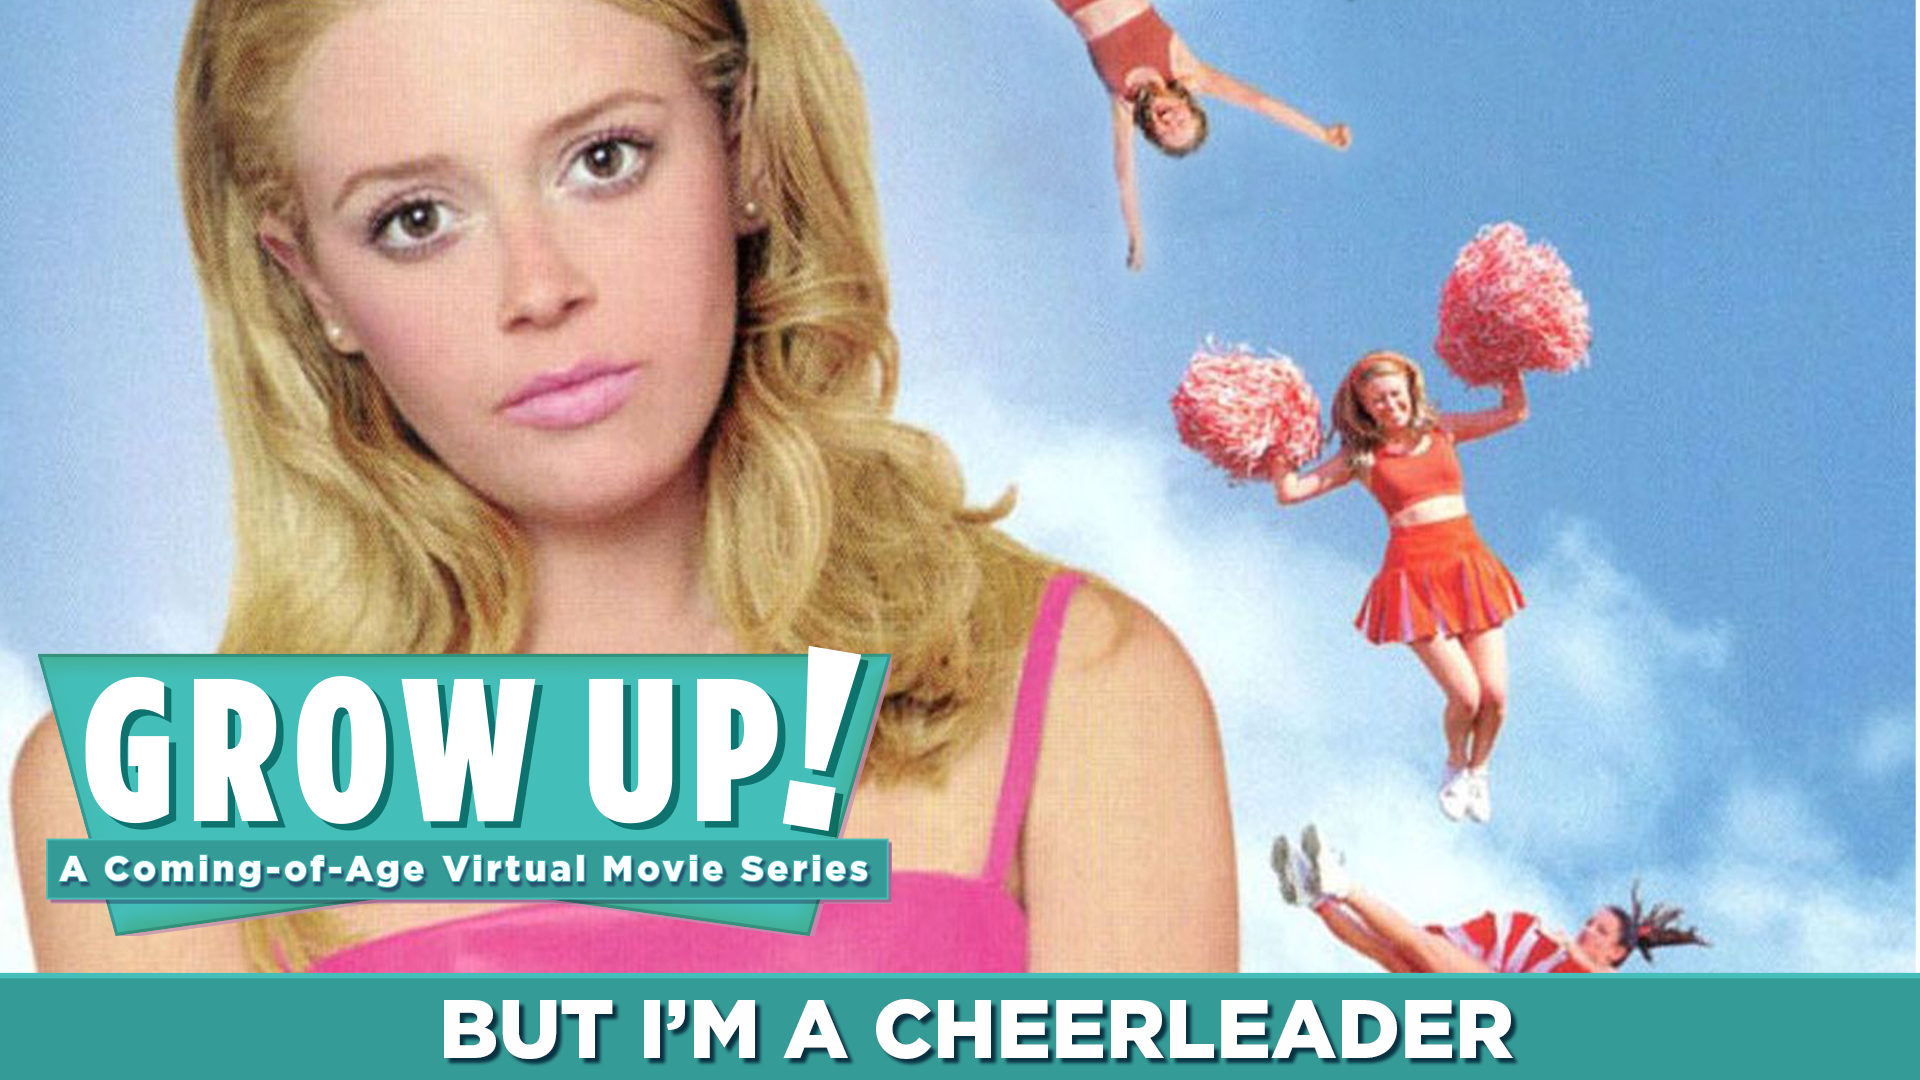 Grow Up! A Coming-of-Age Virtual Movie Series - But I'm a Cheerleader